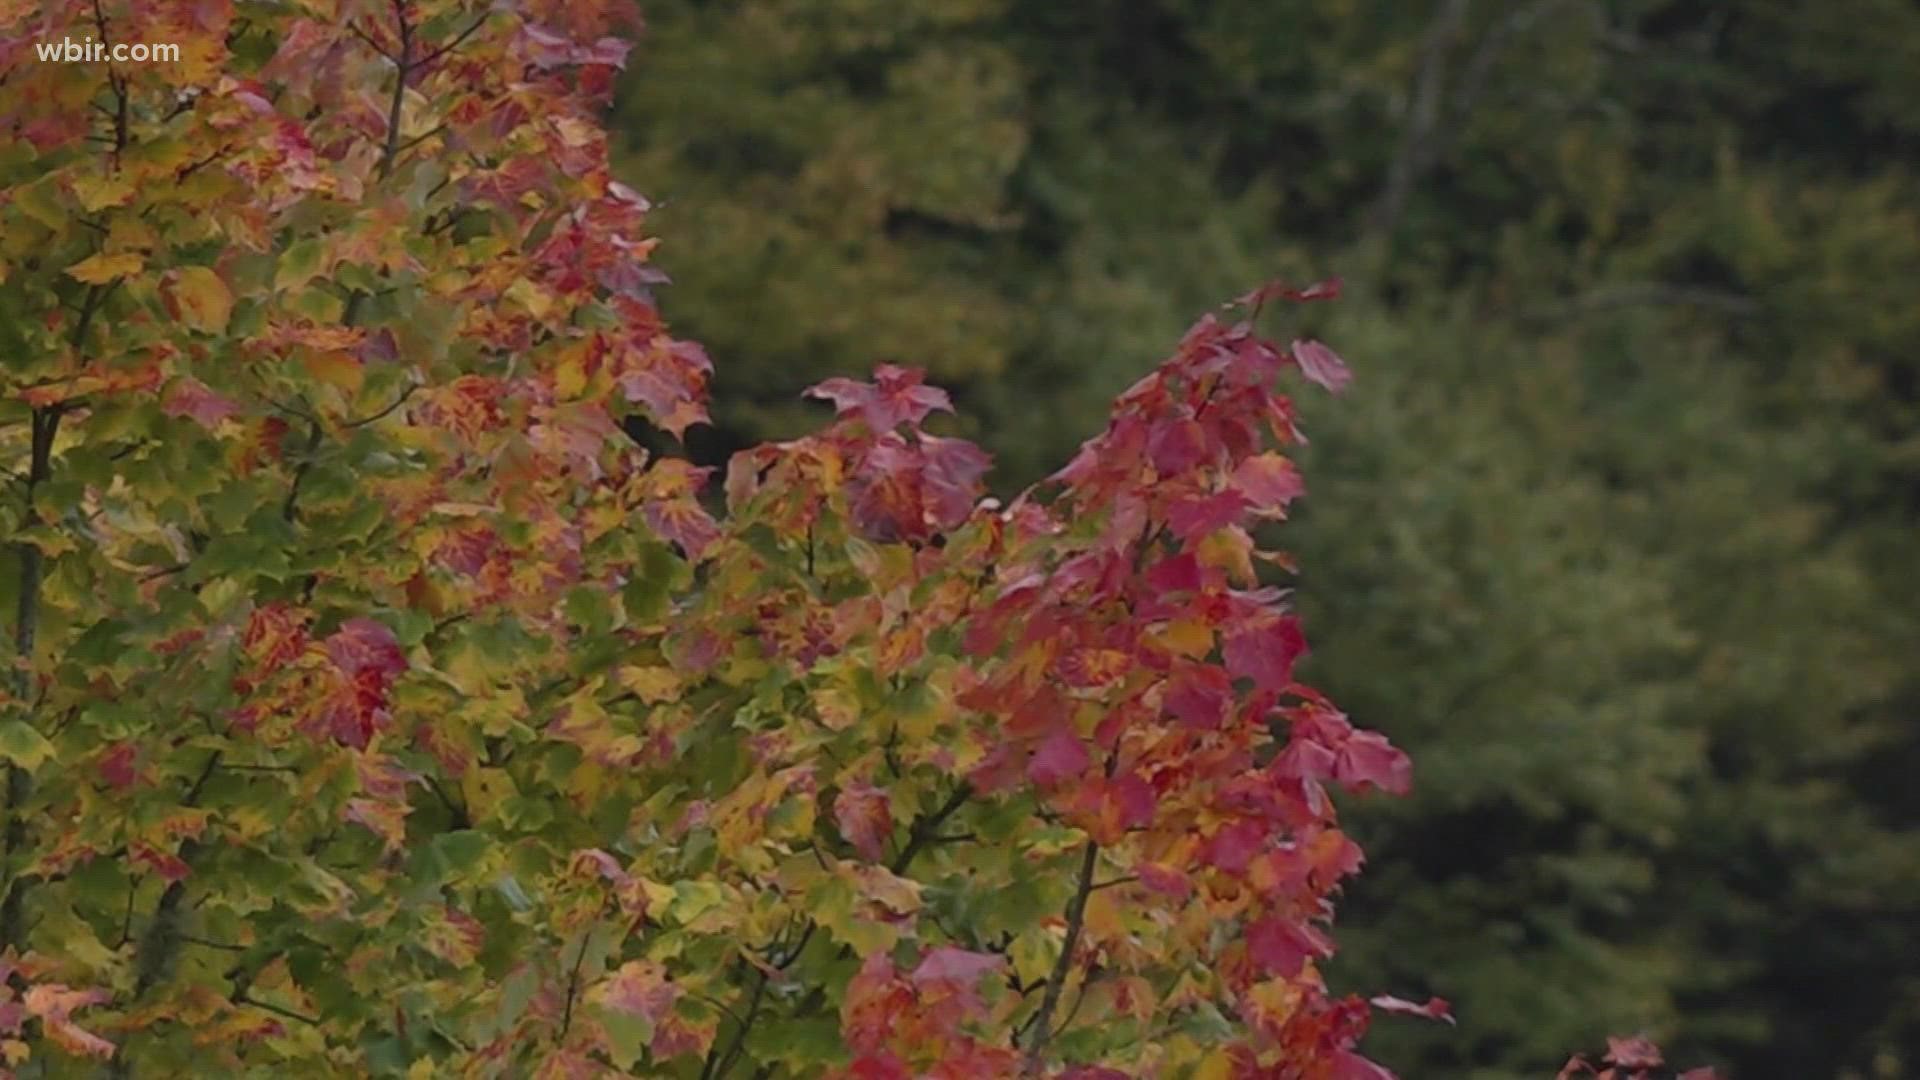 In the higher elevations, visitors were thrilled to see oranges, reds and yellows. An expert said the colors will likely peak around Halloween.